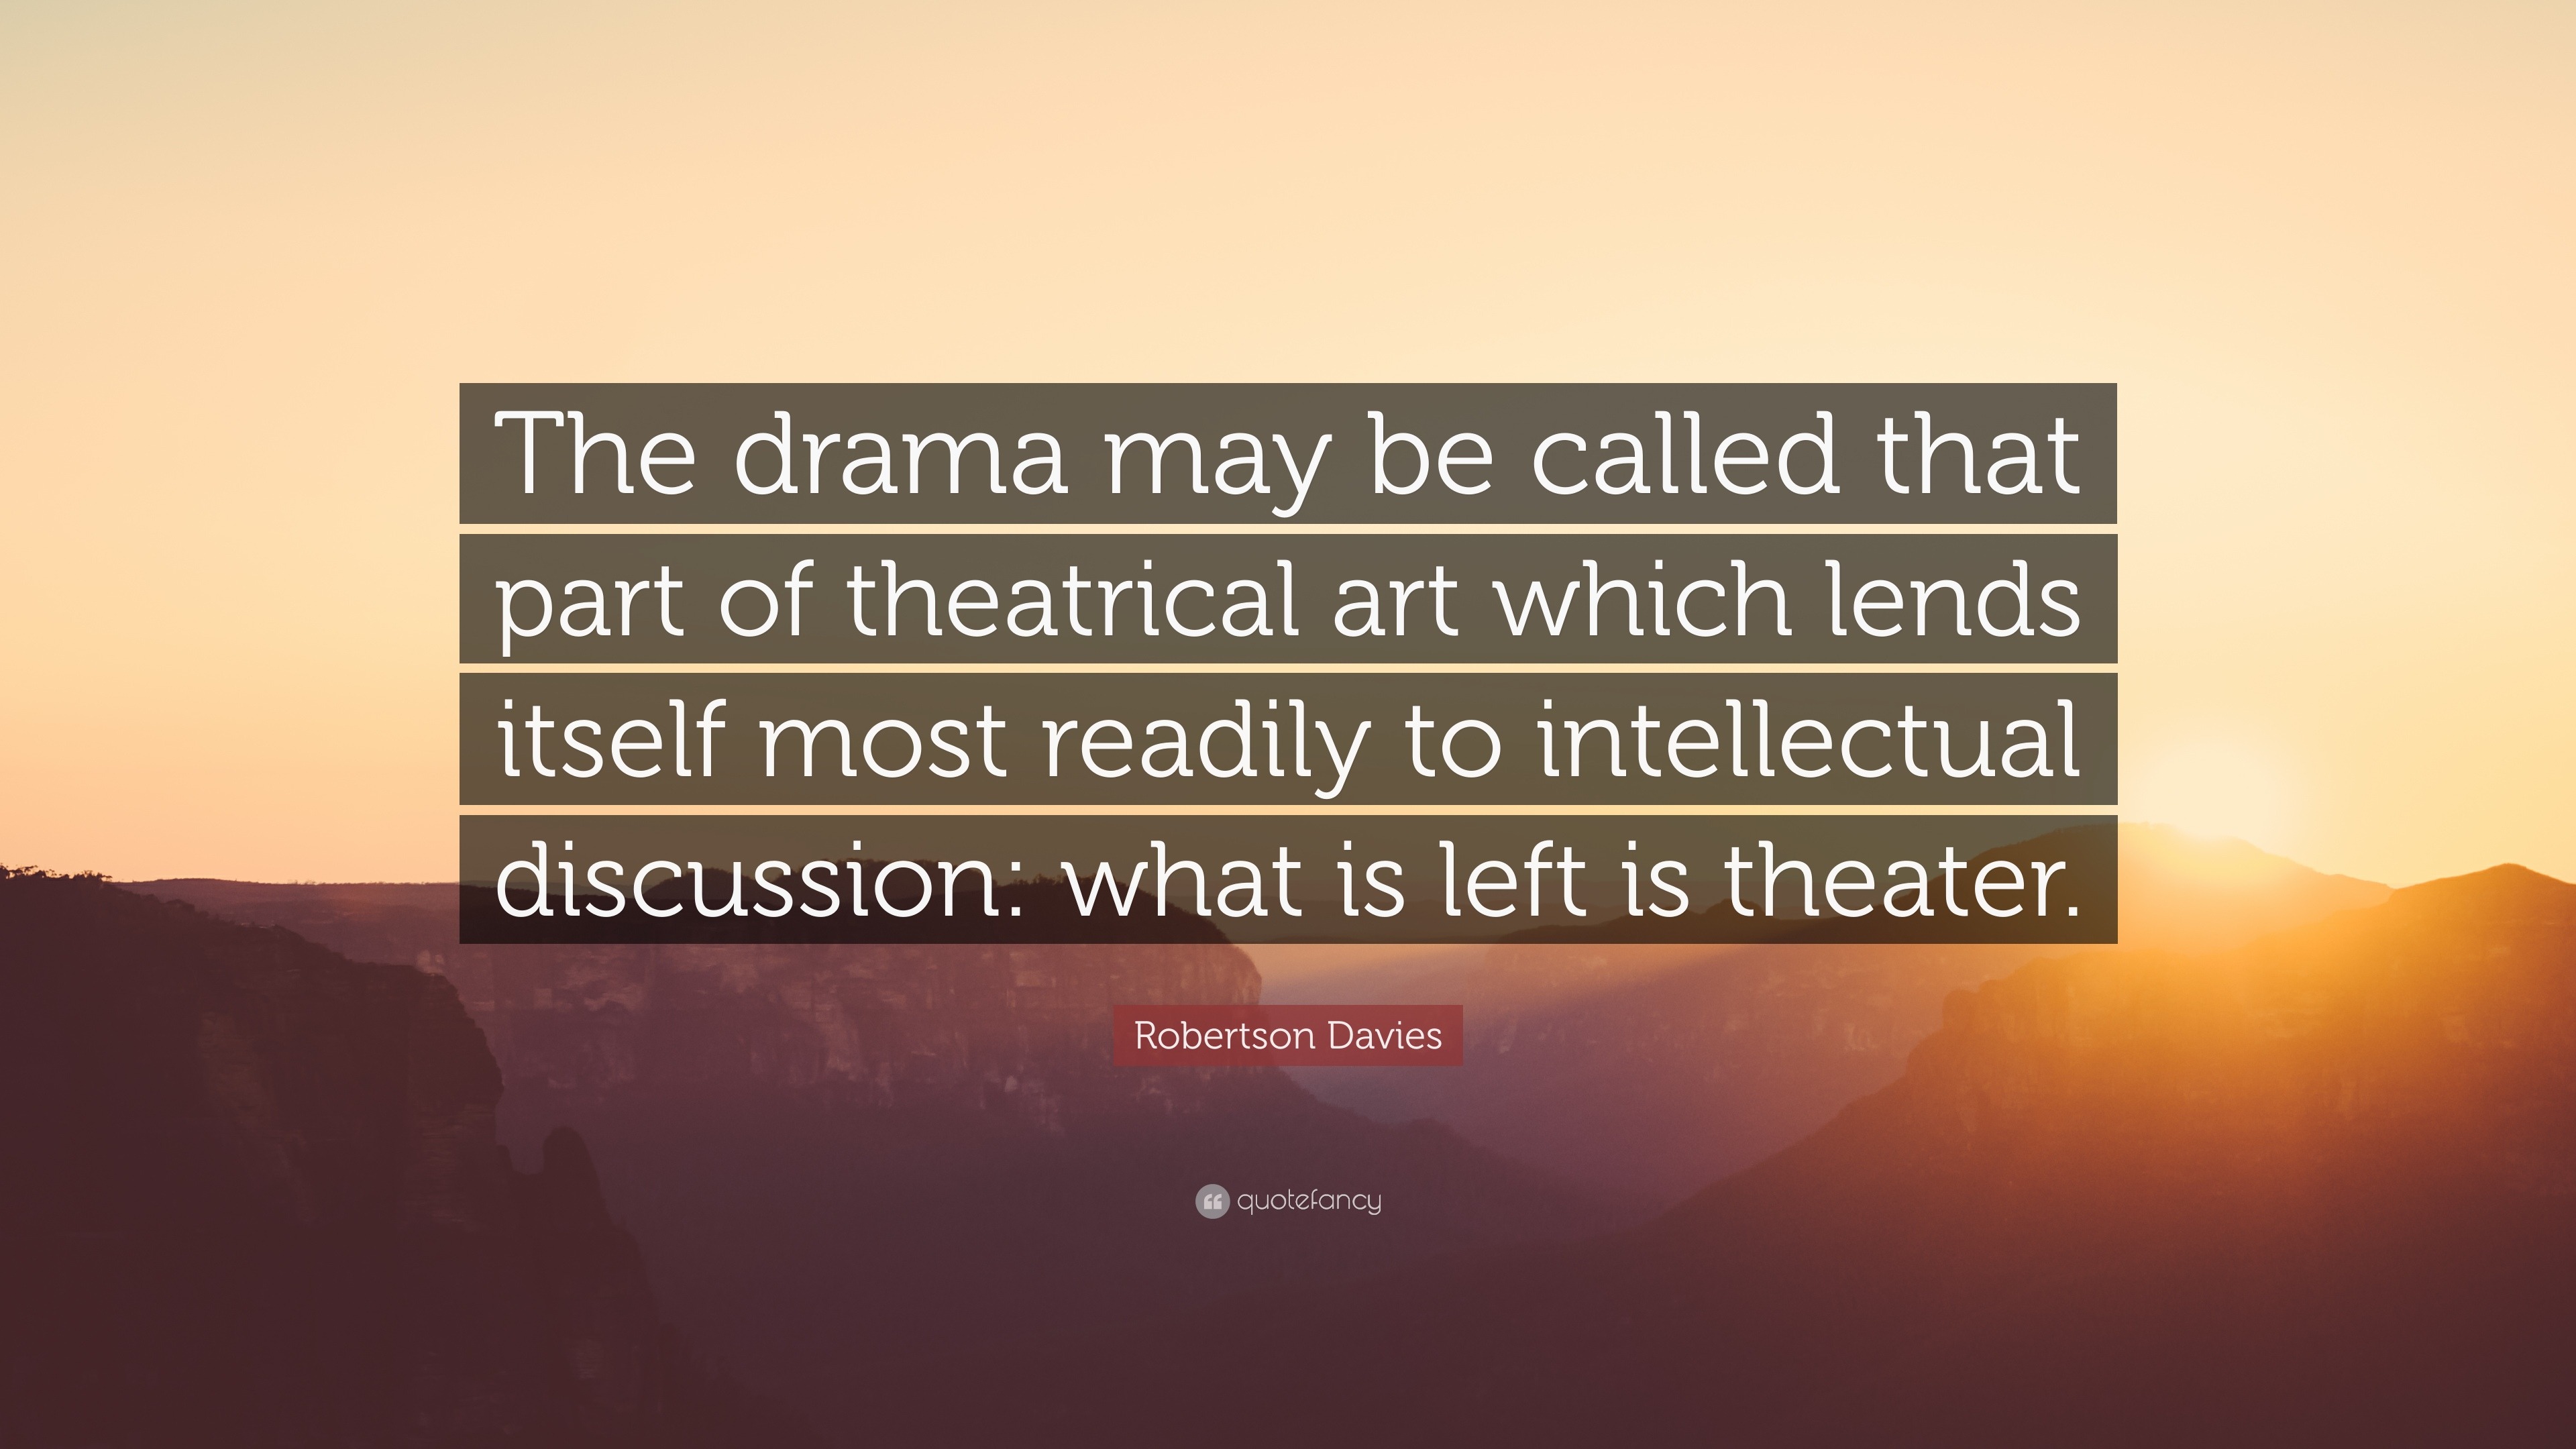 Robertson Davies Quote: “The drama may be called that part of ...